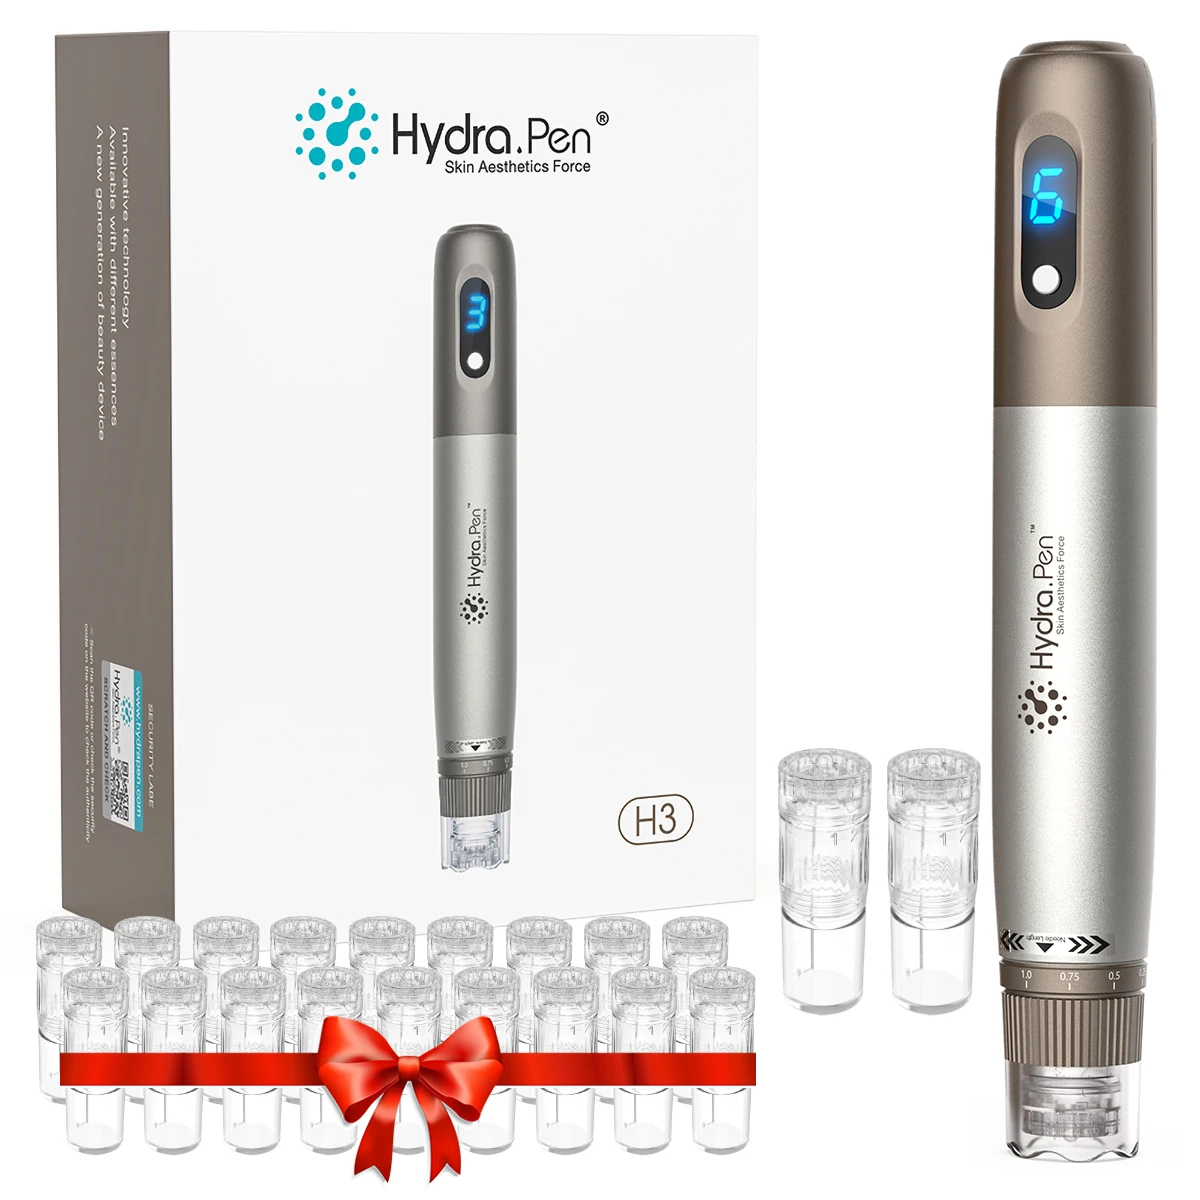 

Professional Hydra.Pen H3 Microneedling With 22pcs Cartridges Derma Pen Skin Care Anti-Acne Wrinkle Removal Mesotherapy